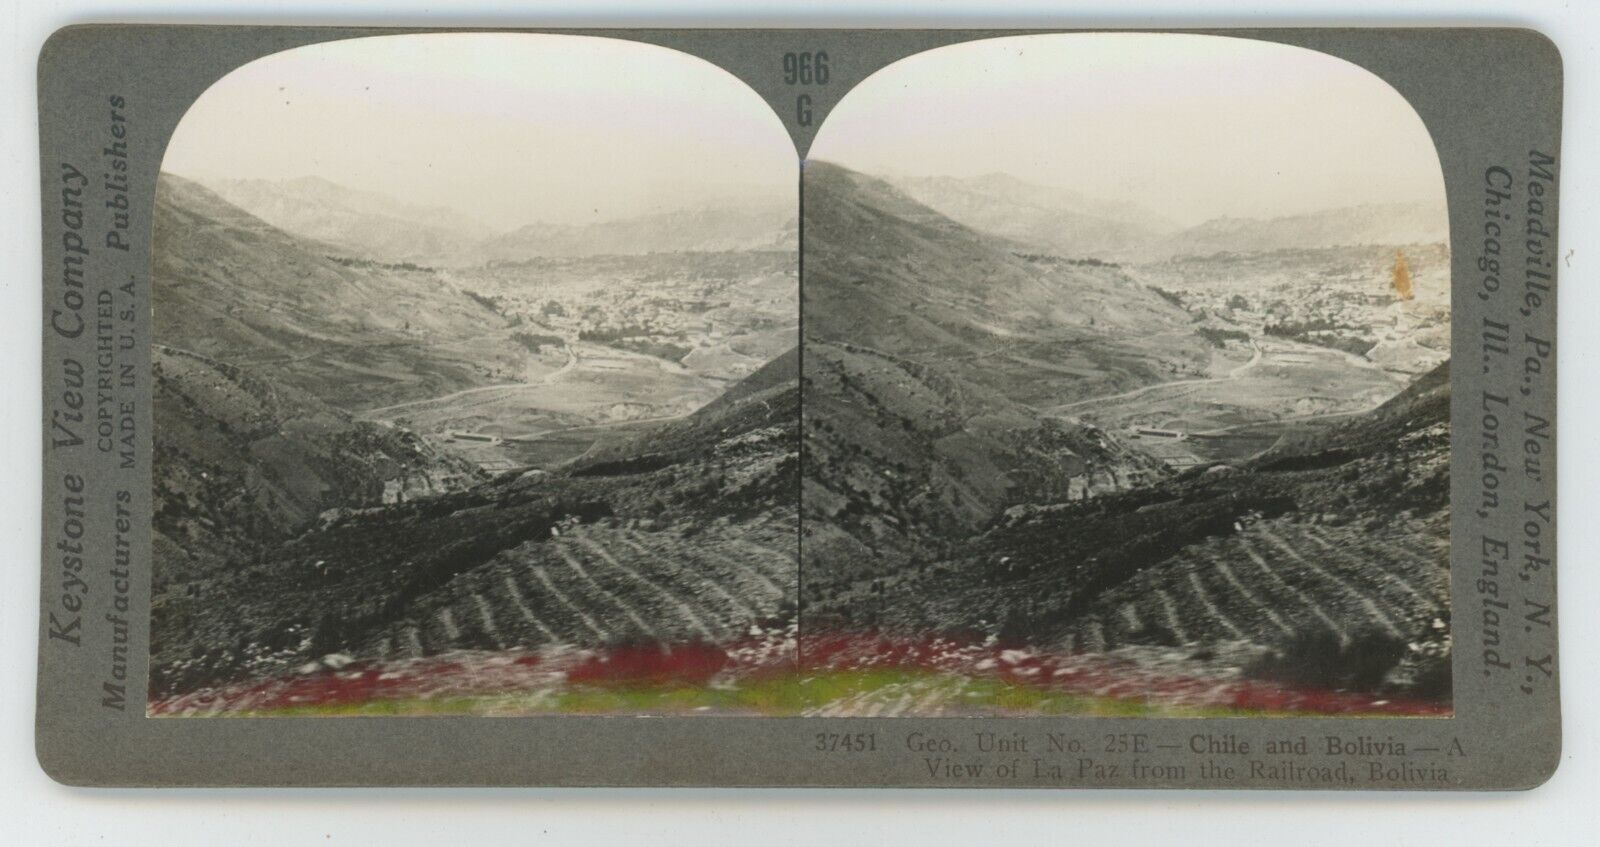 c1900's Real Photo Stereoview Chile and Bolivia a View of La Paz from Railroad